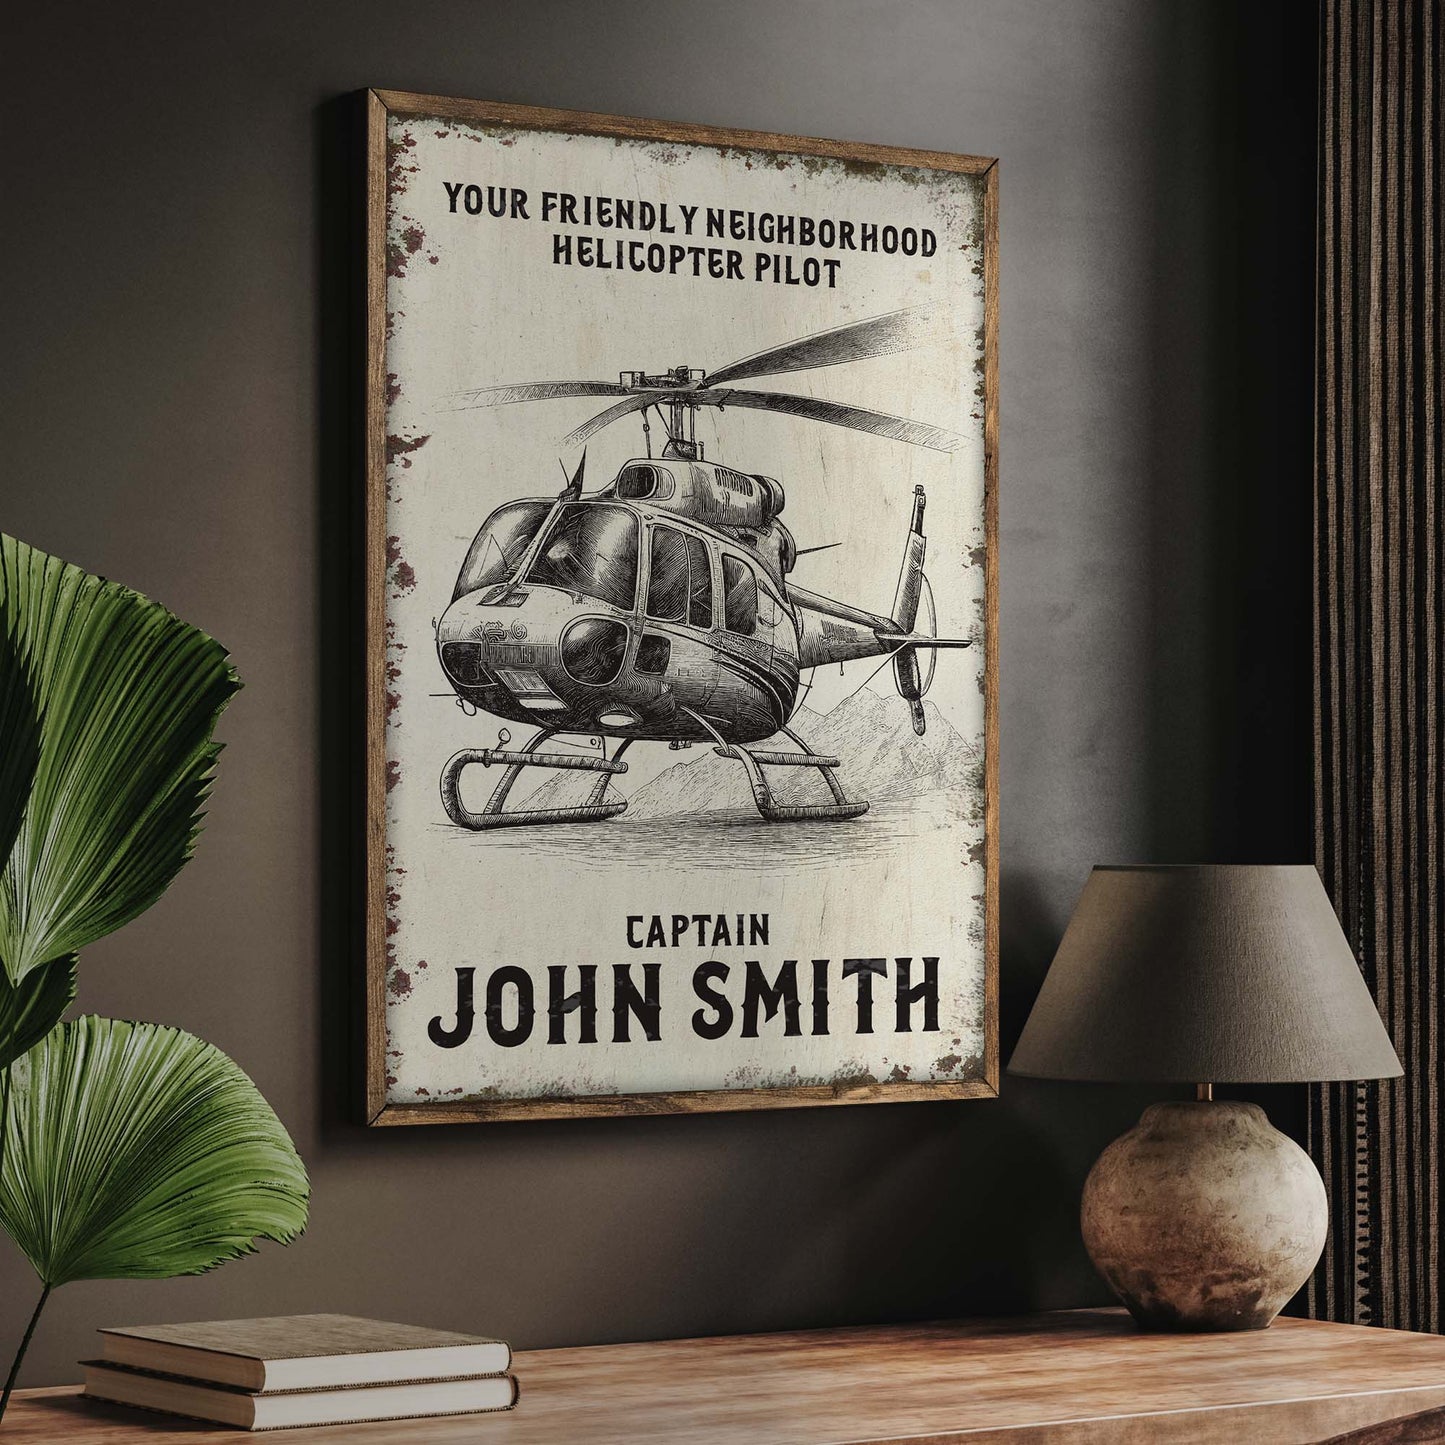 Helicopter Pilot Name Sign - Image by Tailored Canvases